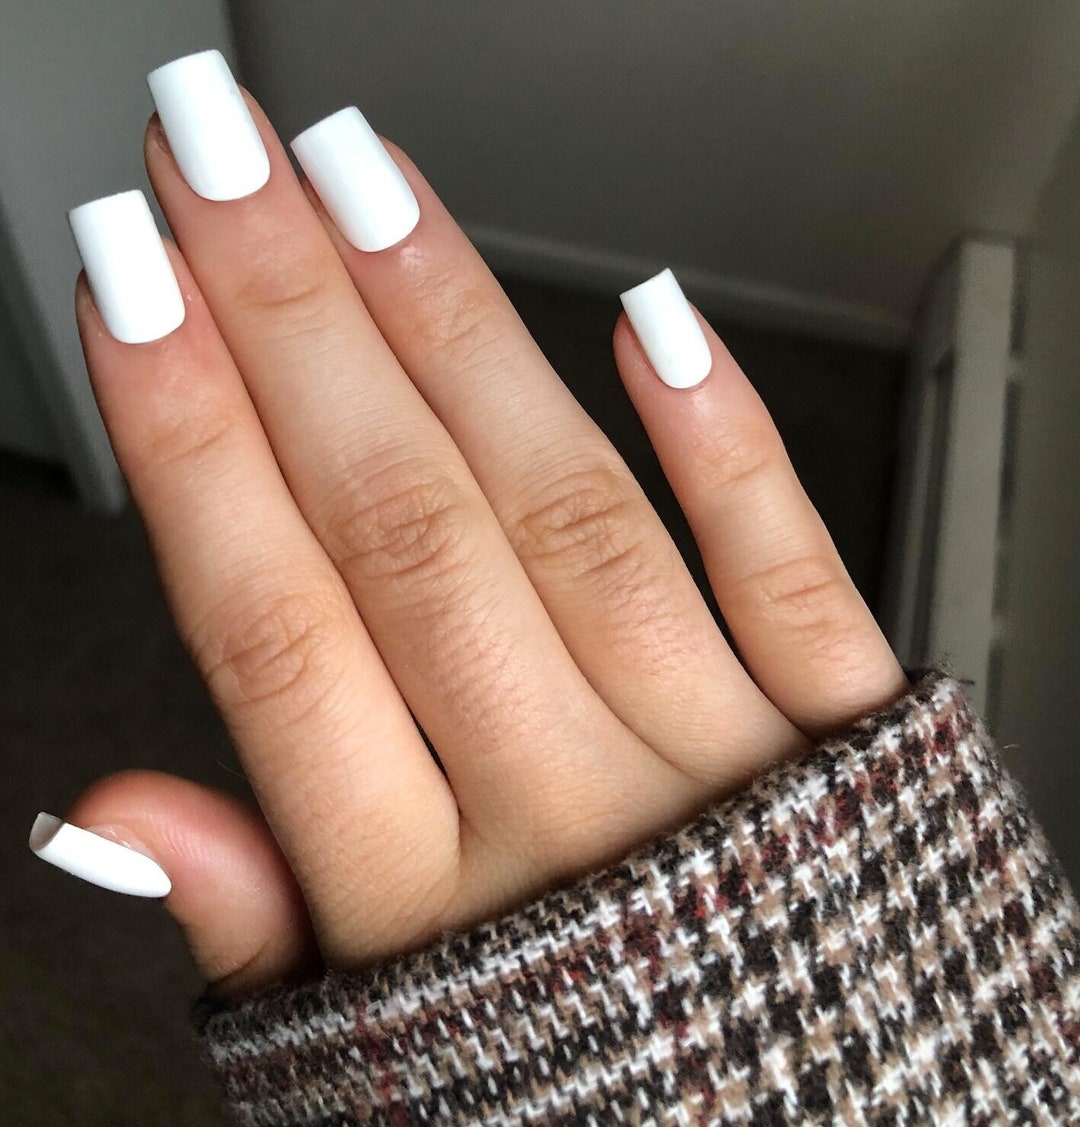 White Scuffed Nails after Gels?